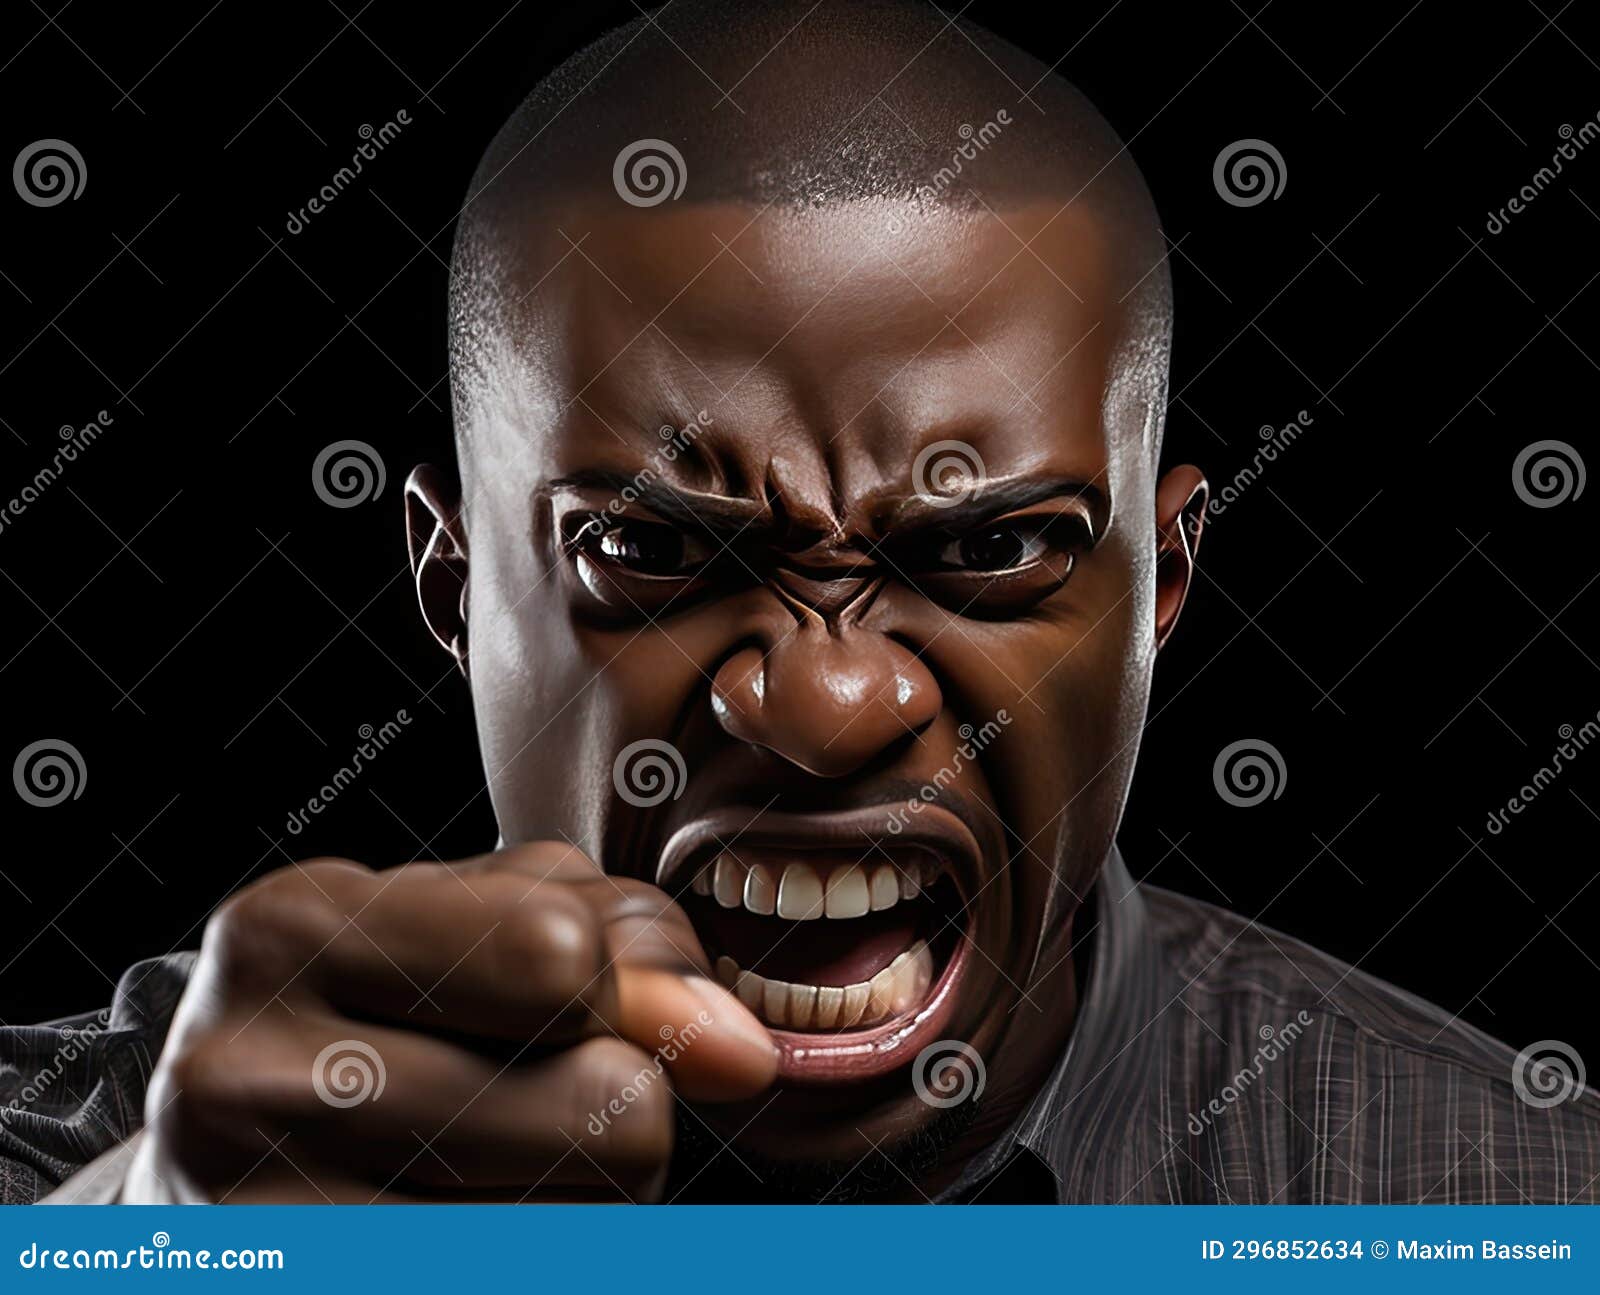 An African Man in a State of Extreme Rage, with Clenched Fists and Jaw ...